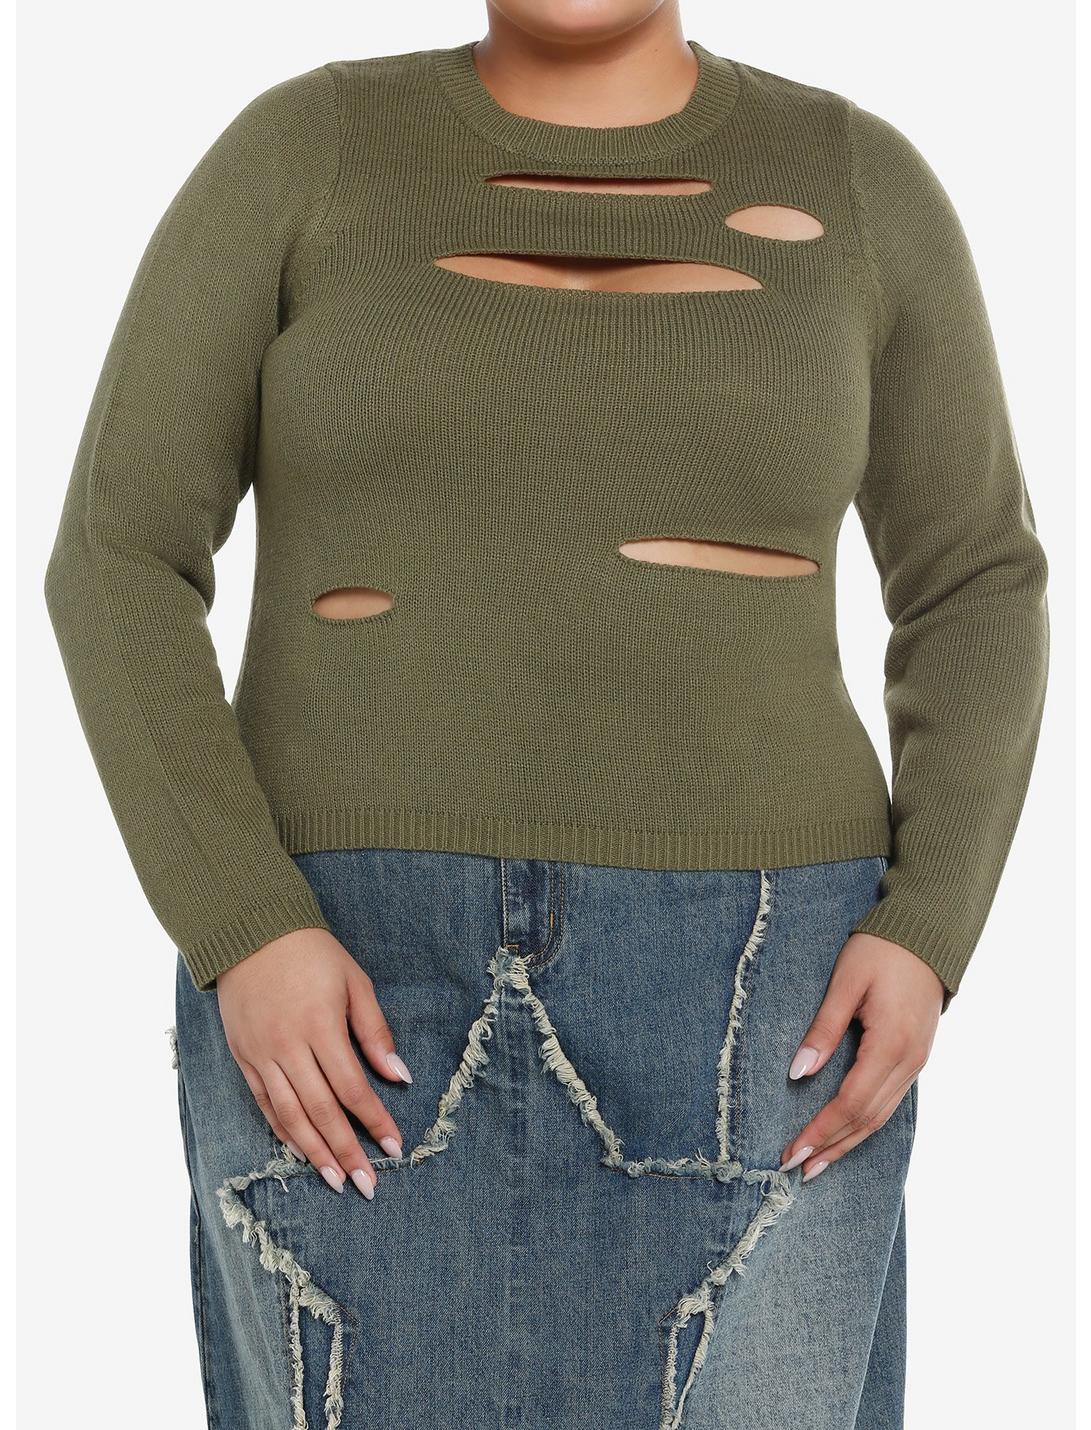 Social Collision Olive Distressed Cutout Girls Sweater Plus Size, OLIVE, hi-res